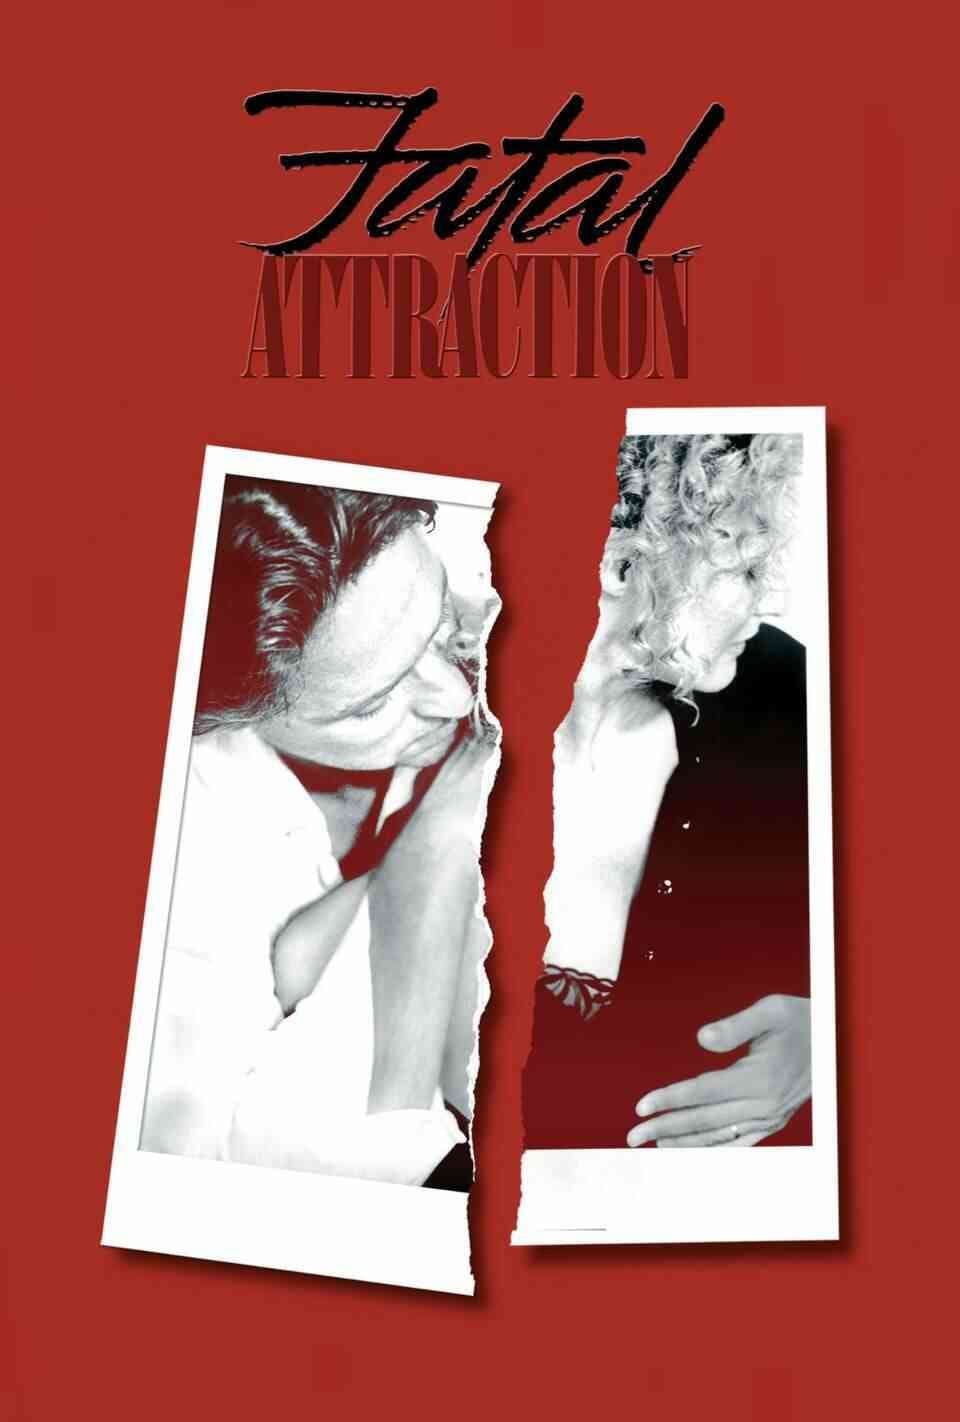 Read Fatal Attraction screenplay (poster)